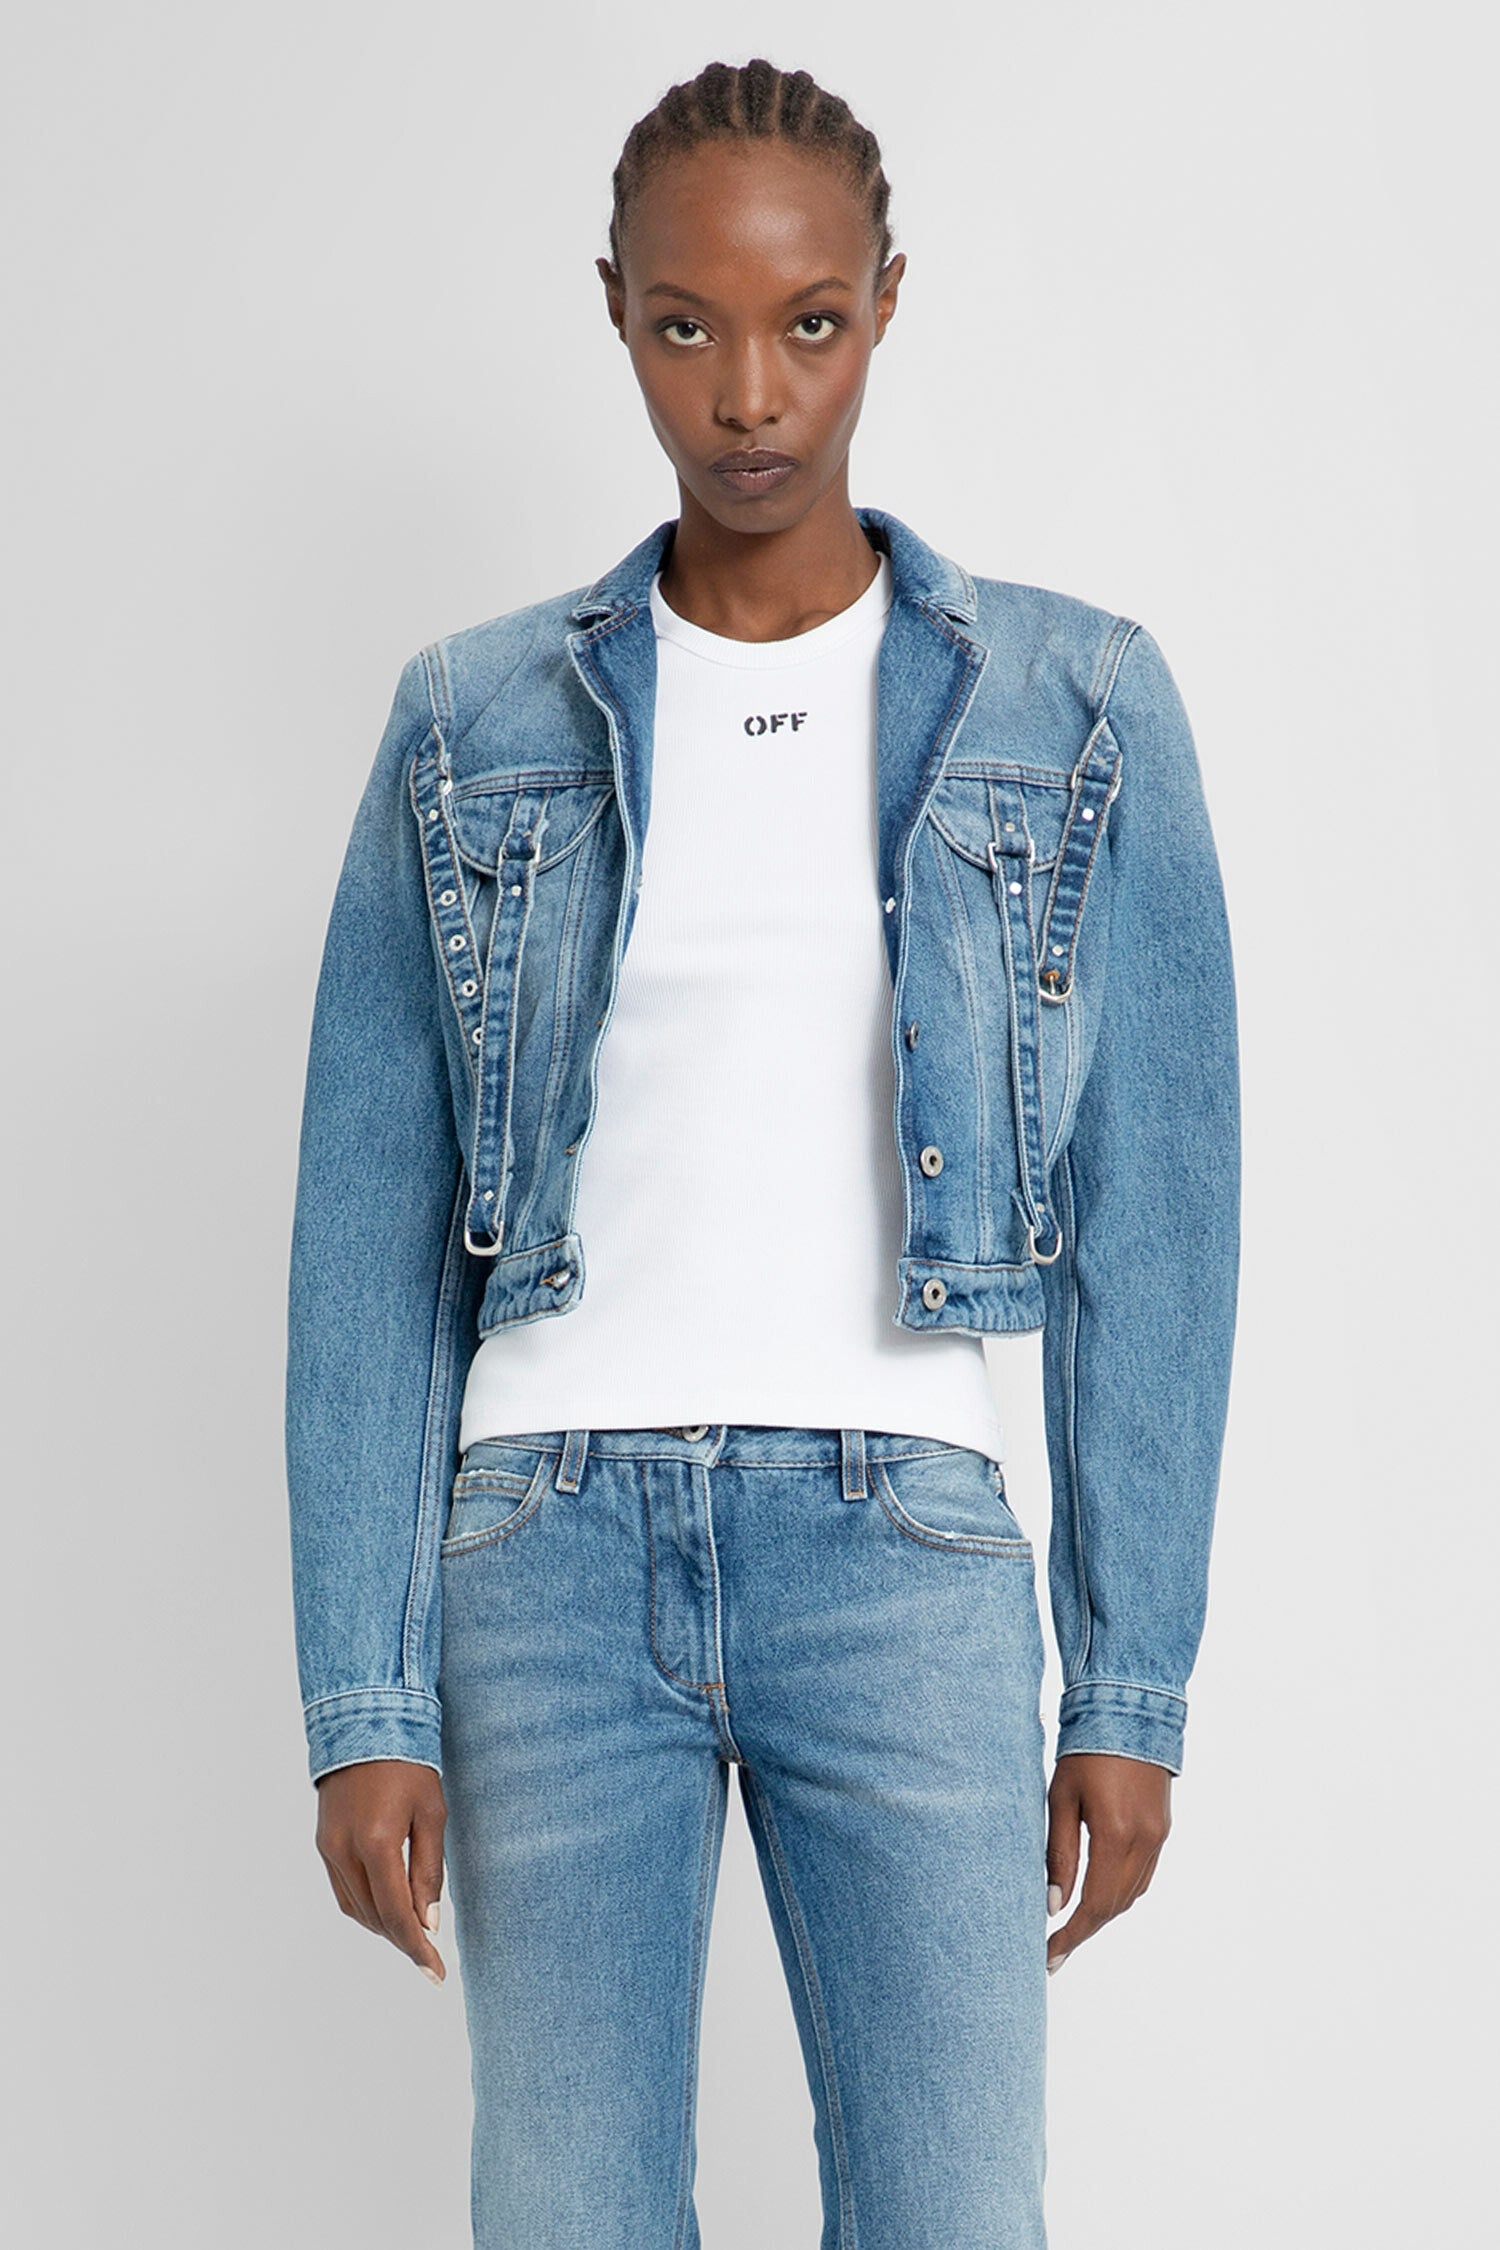 OFF-WHITE WOMAN BLUE JACKETS - 1